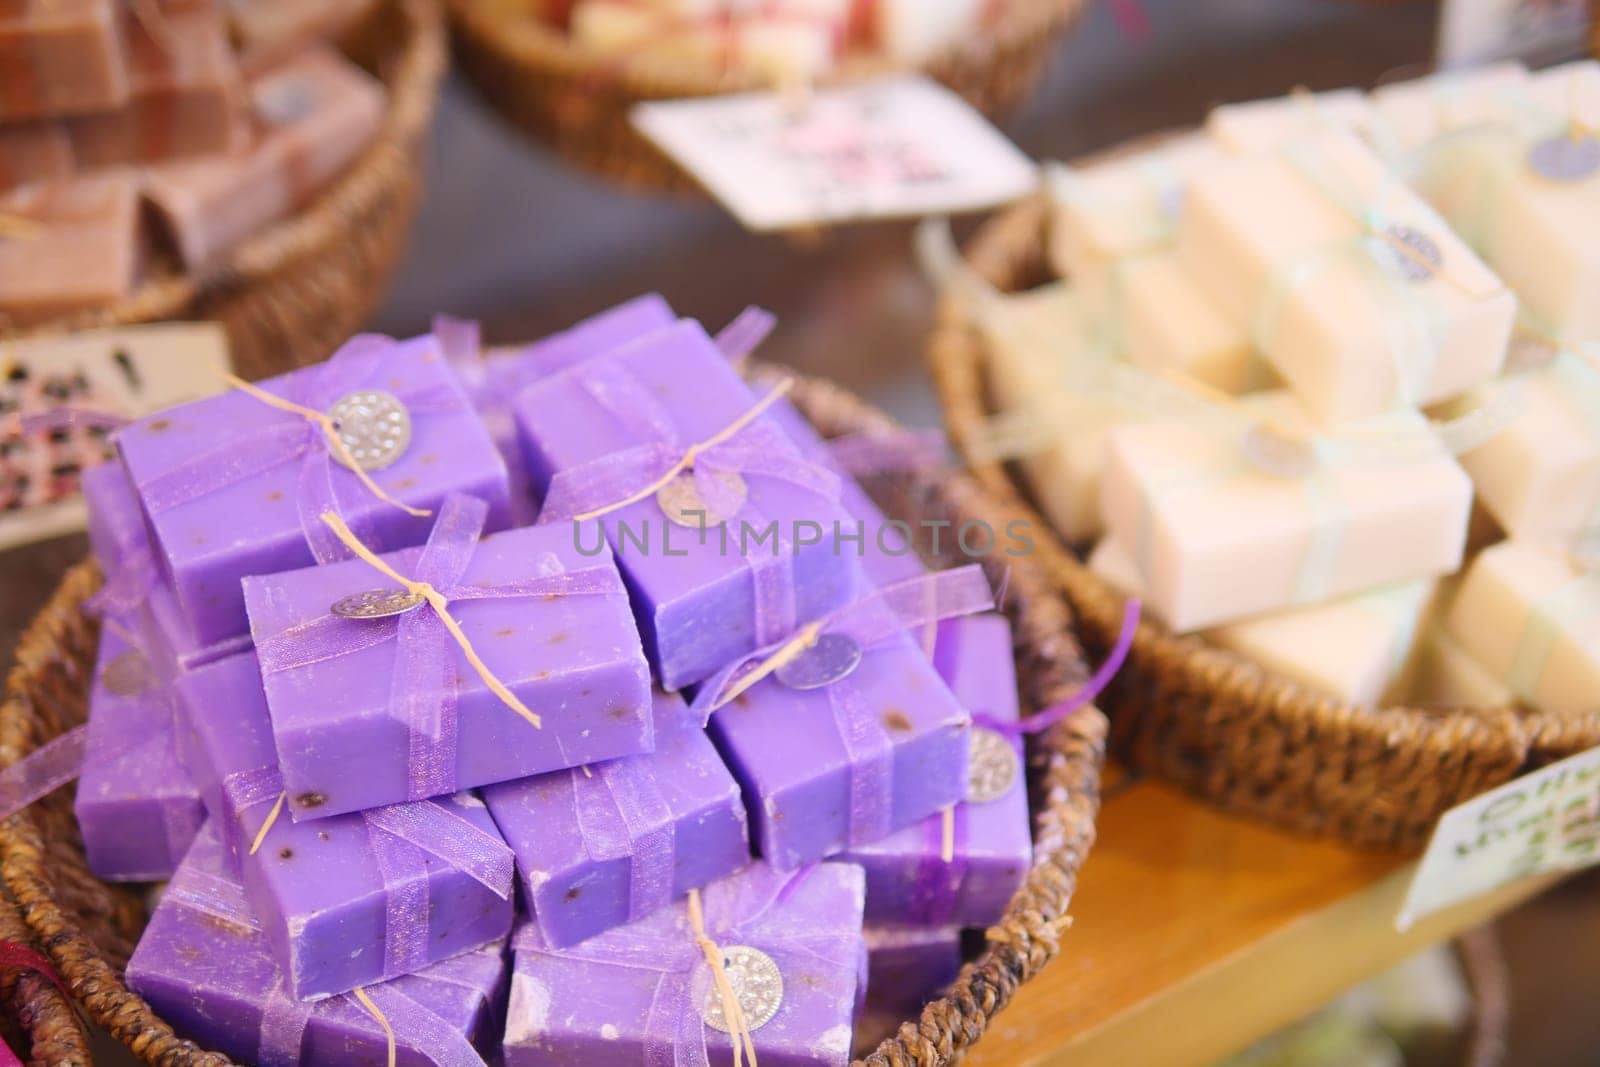 A stack of purple soaps with blue ribbons in a basket by towfiq007